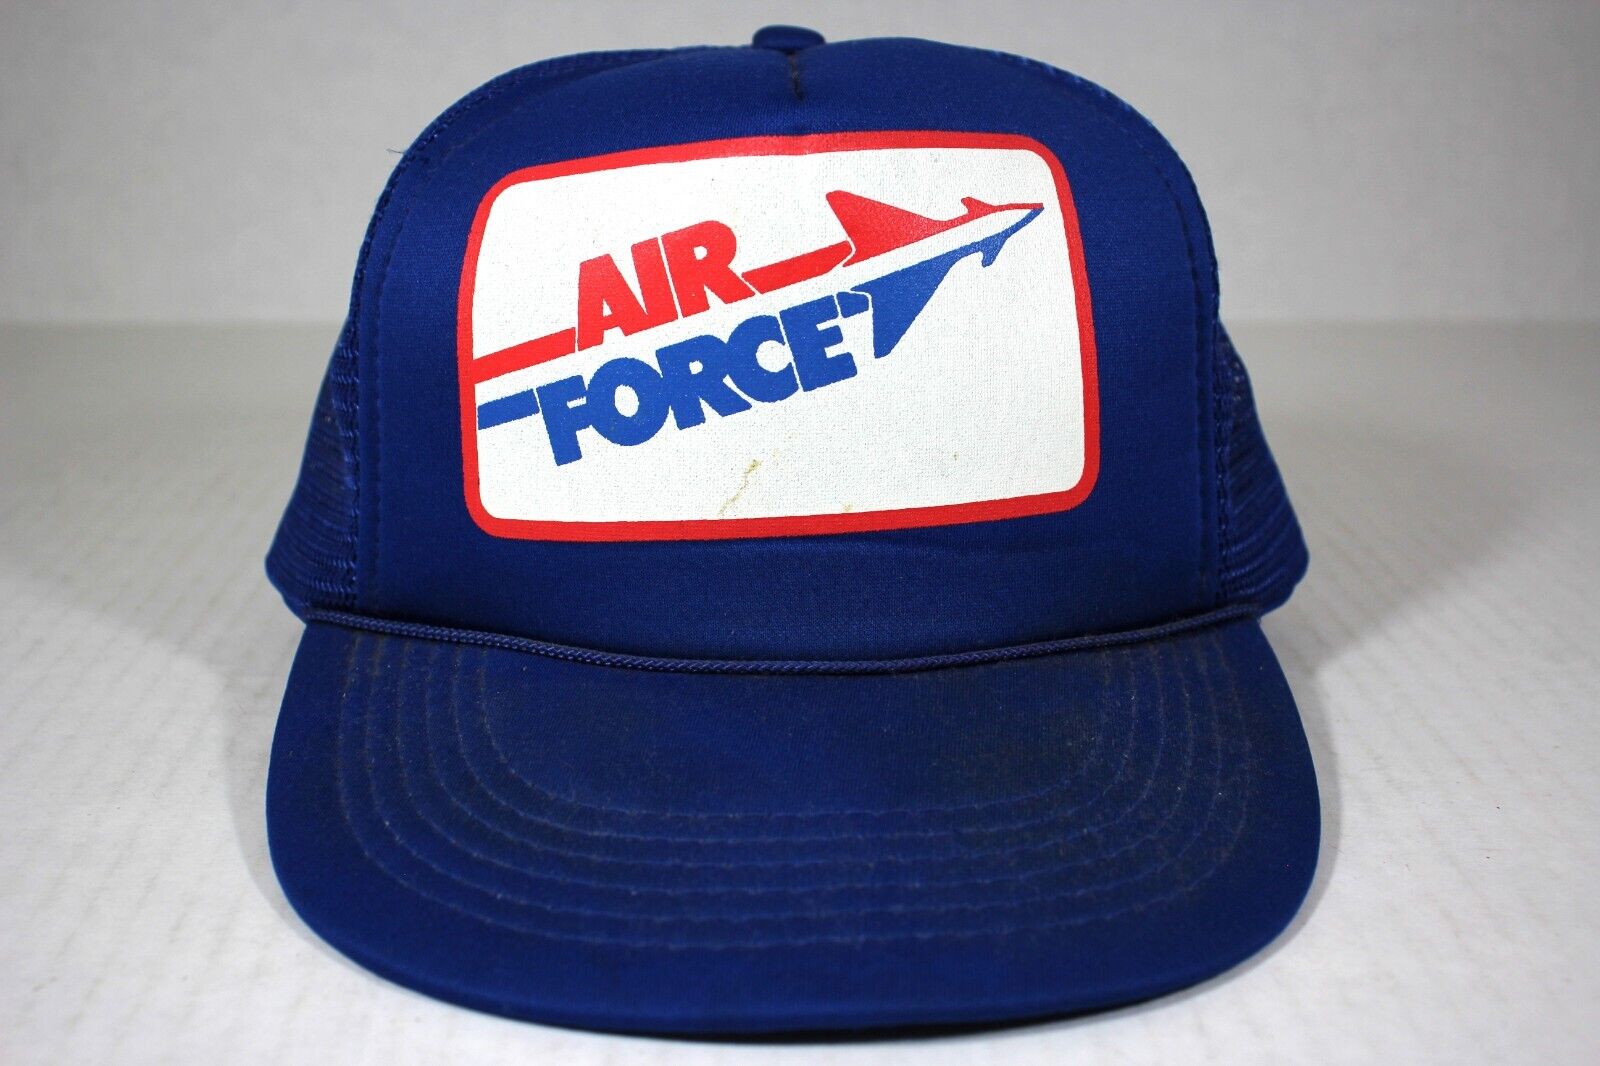 Vintage Air Force Army Spell Out Trucker Snapback Cap Hat A1436